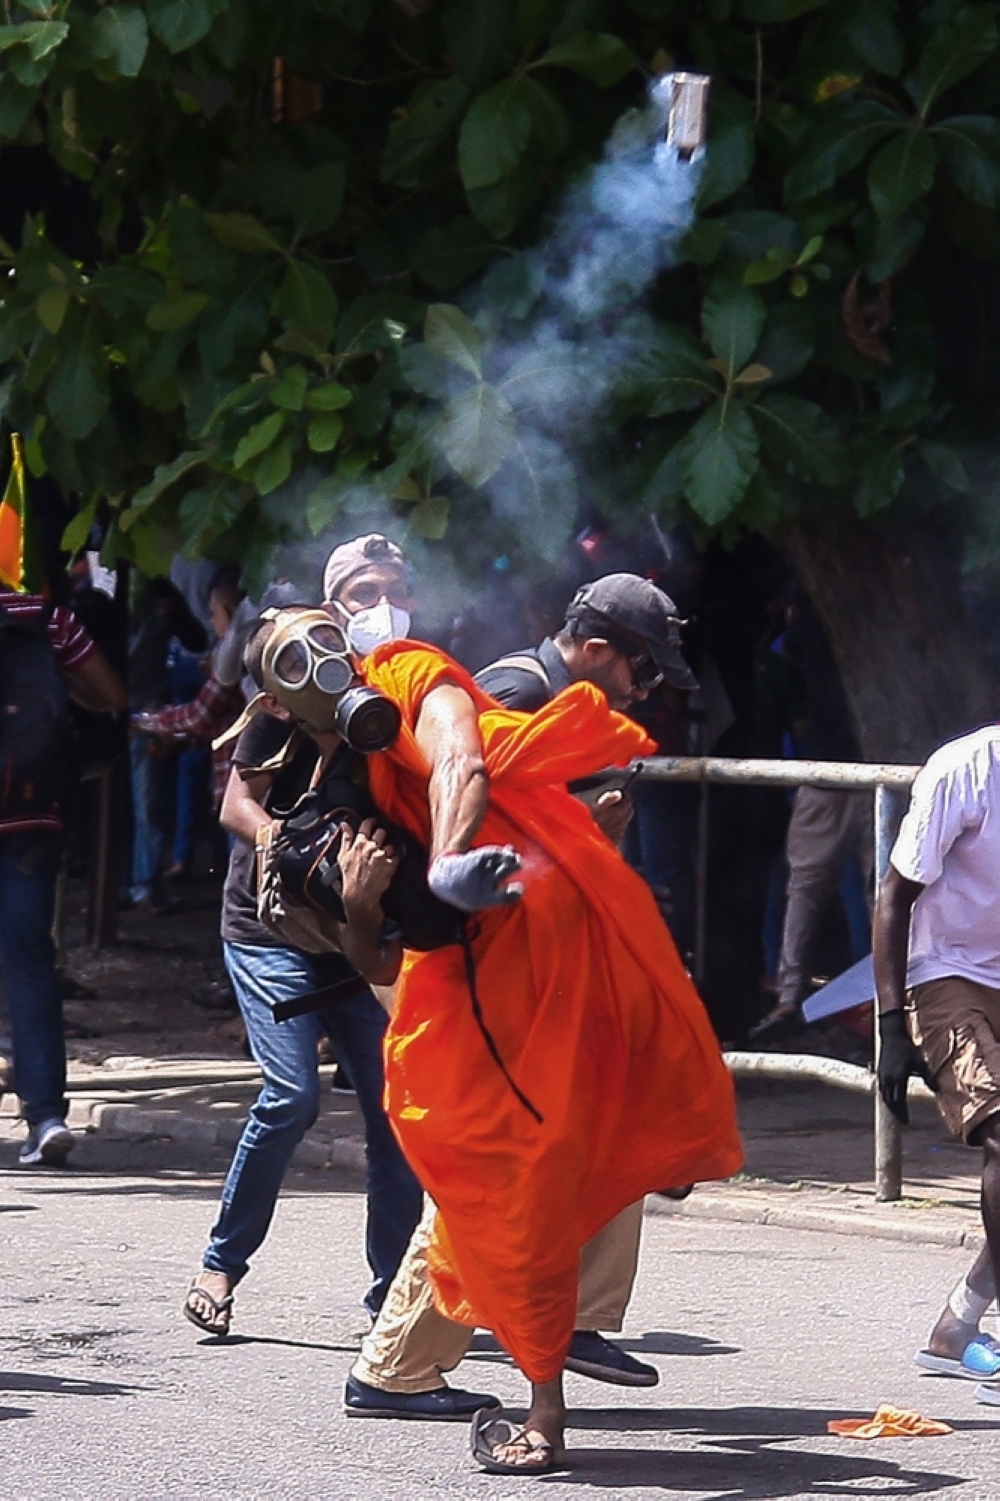 BELLIGERENT A Buddhist monk throws back a tear gas canister fired by the police to disperse protesters demanding the resignation of Sri Lanka’s President Gotabaya Rajapaksa gather near the compound of Sri Lanka’s Presidential Palace in Colombo on Saturday, July 9, 2022. AFP PHOTO